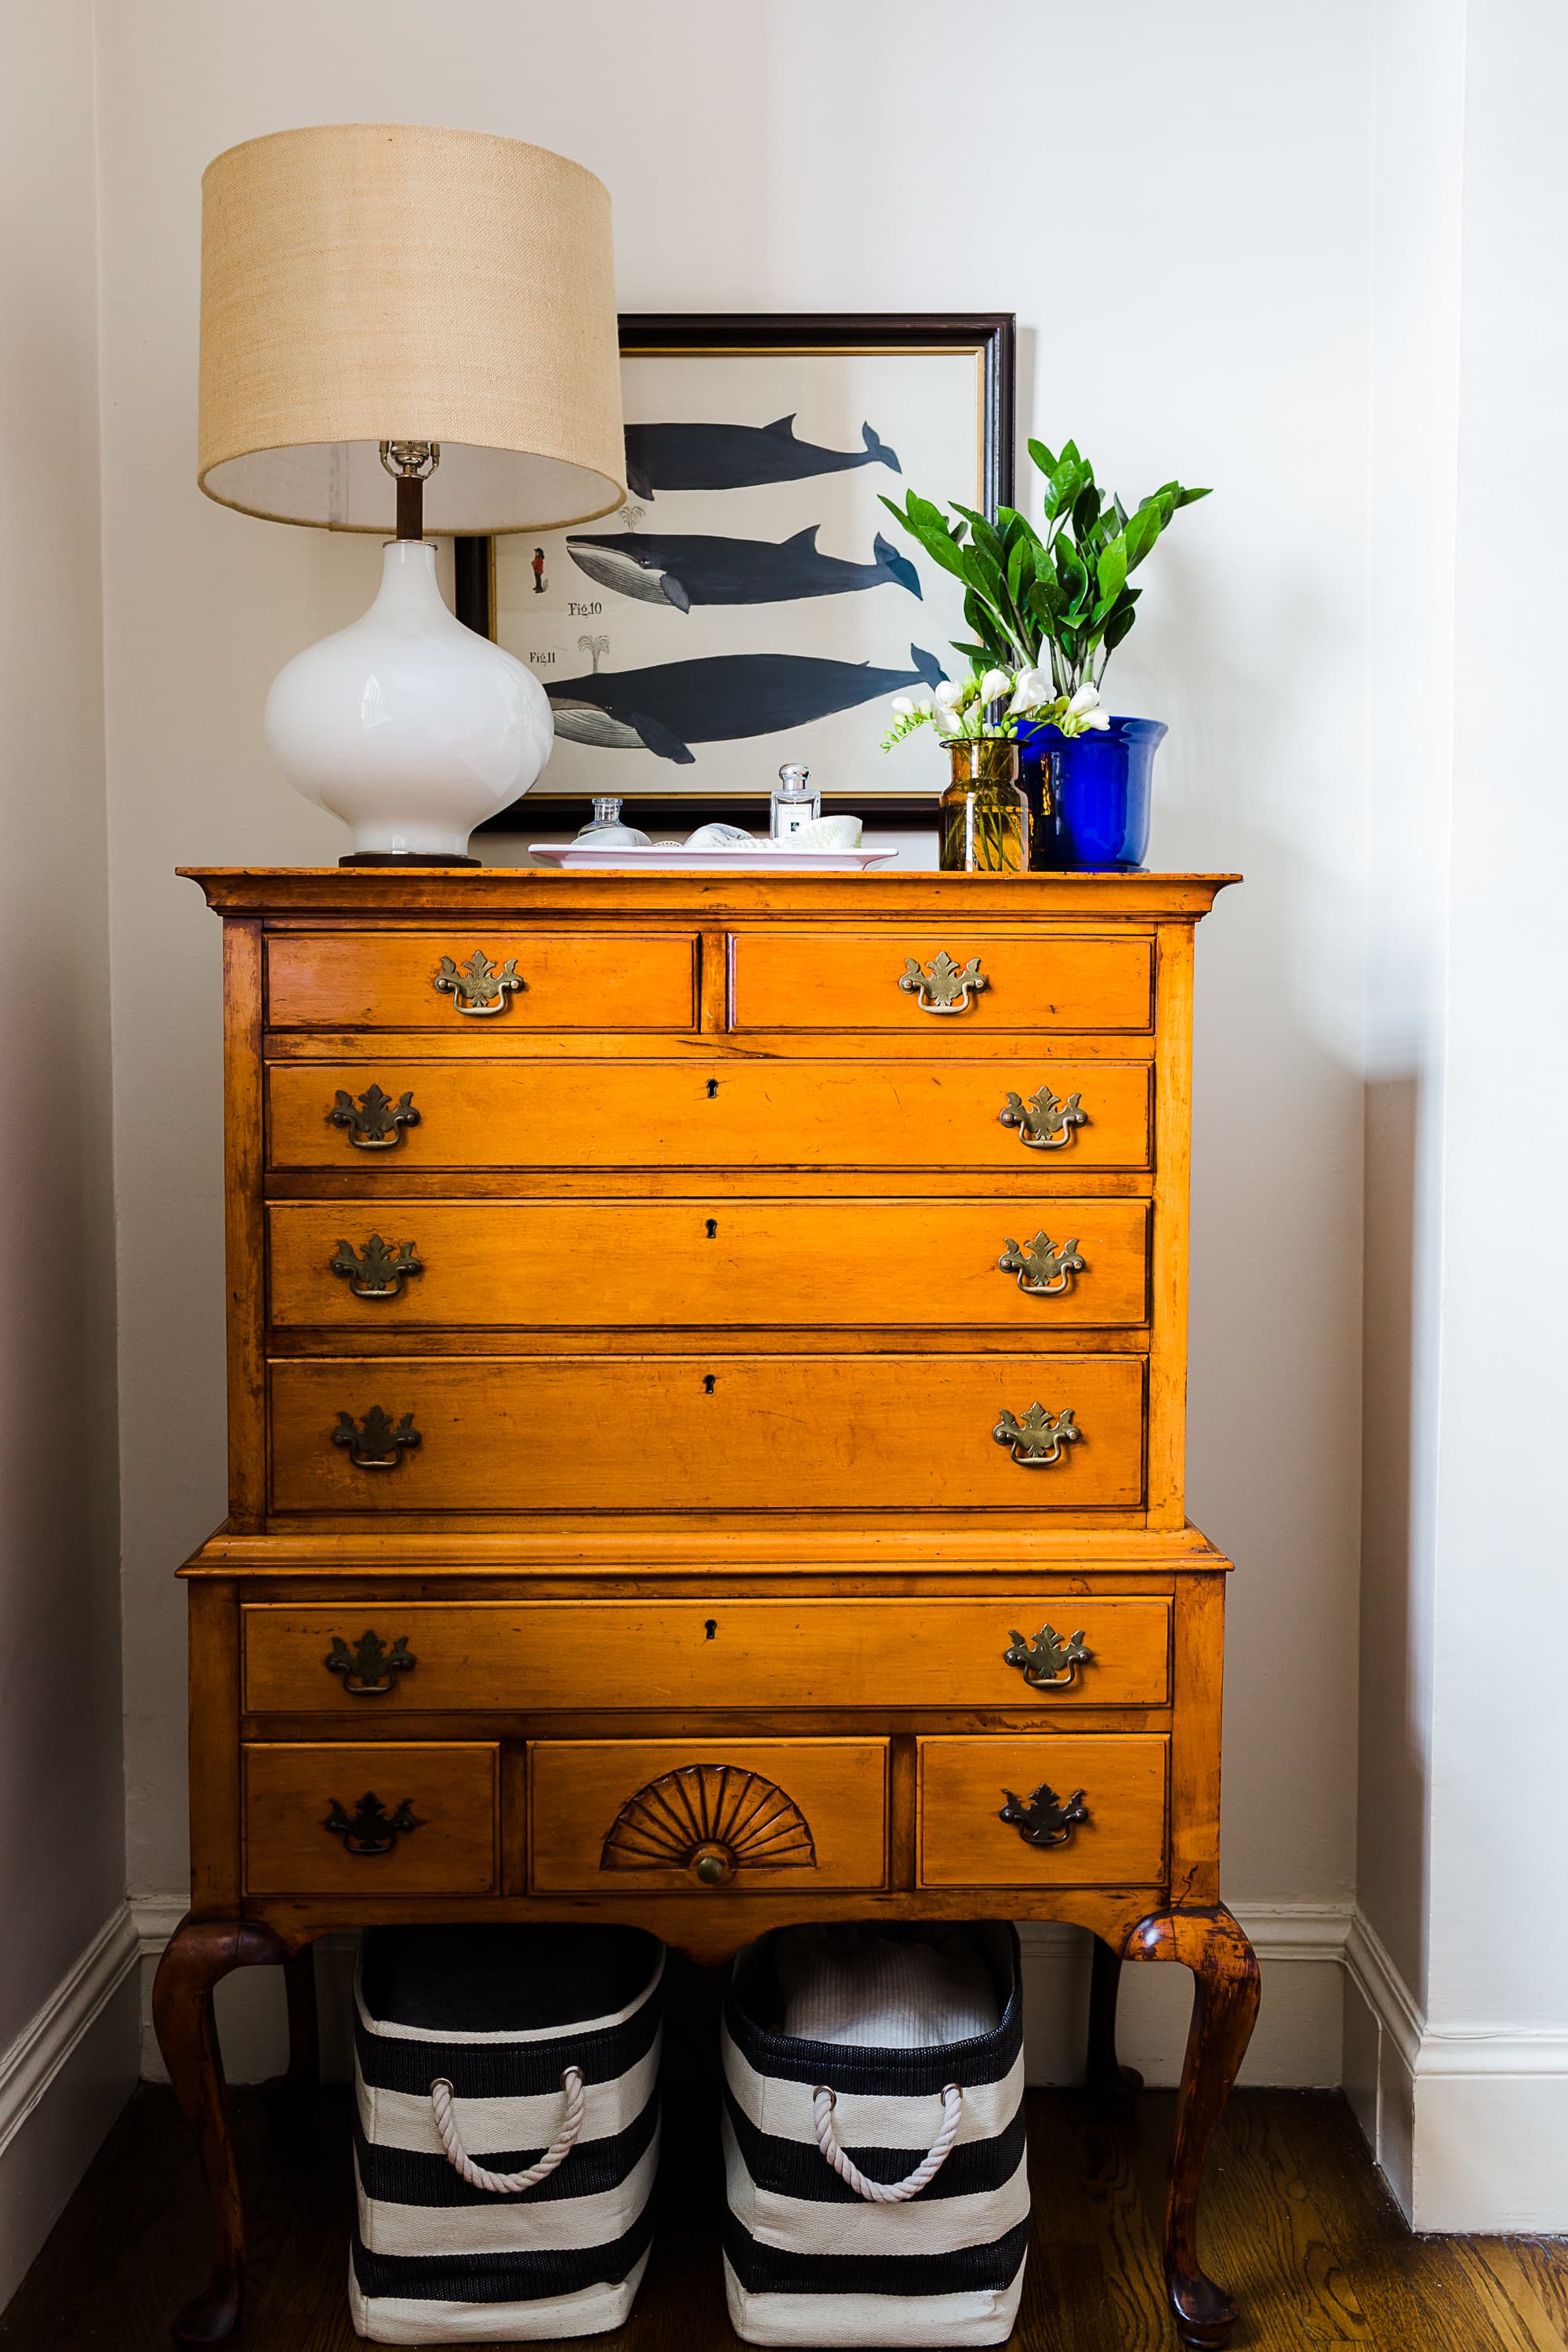 How To Keep The Top Of Your Dresser Clutter Free Forever